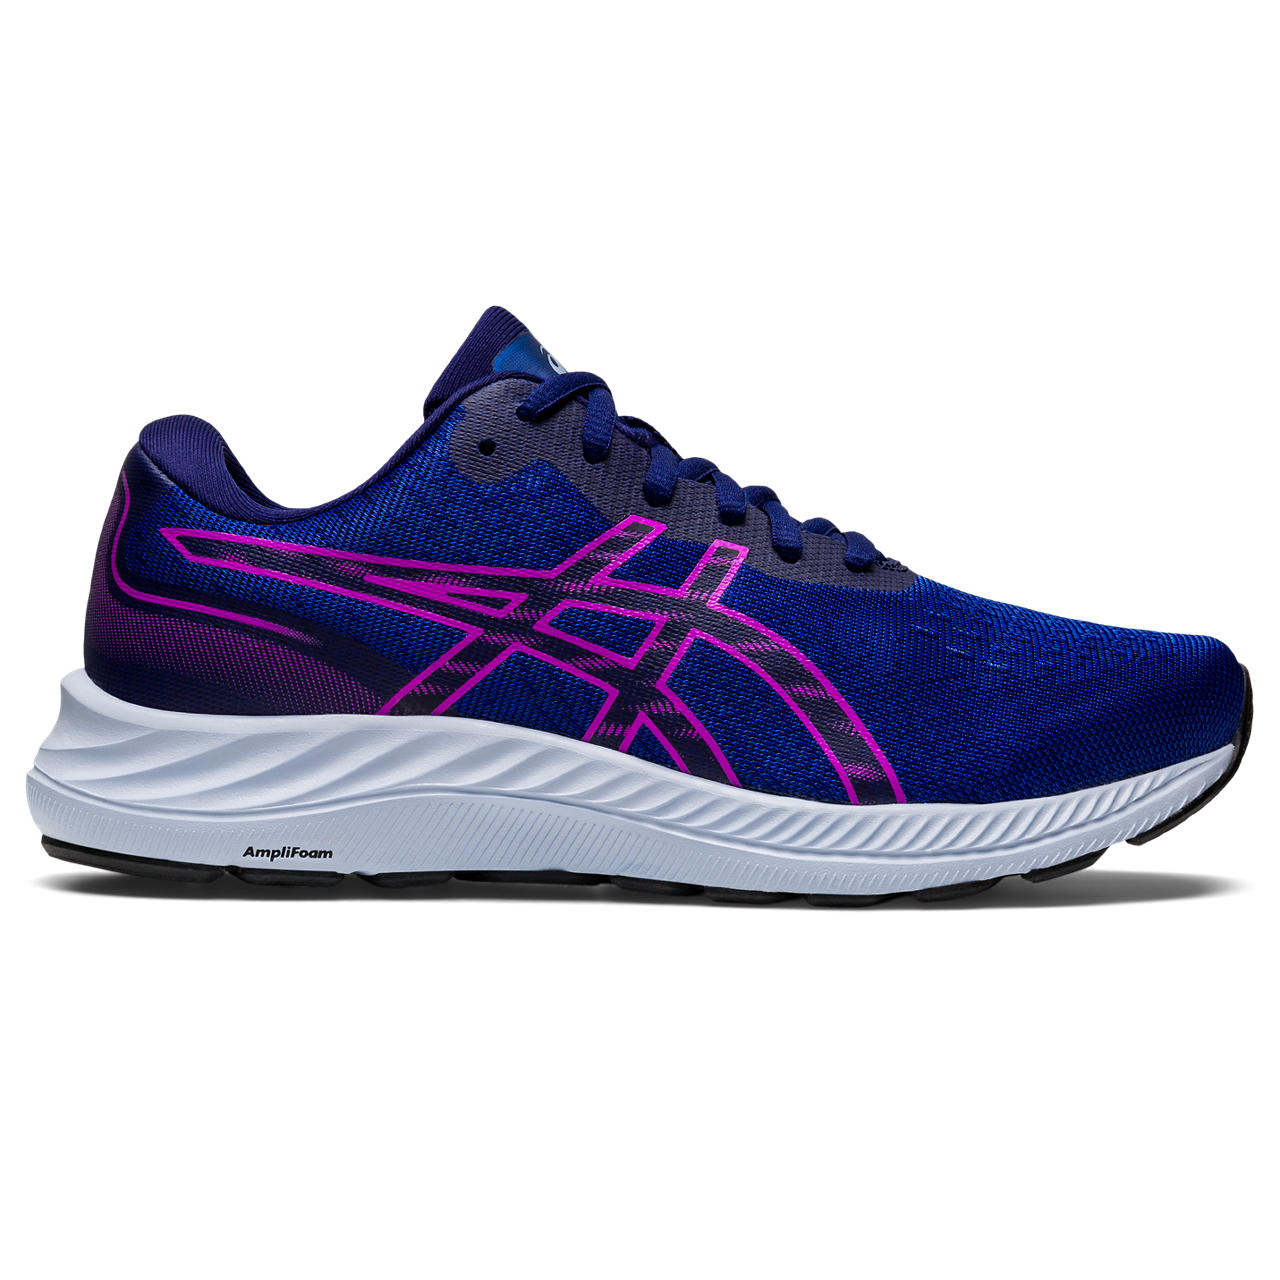 ASICS GEL-EXCITE 9, DIVE BLUE/ORCHID, swatch